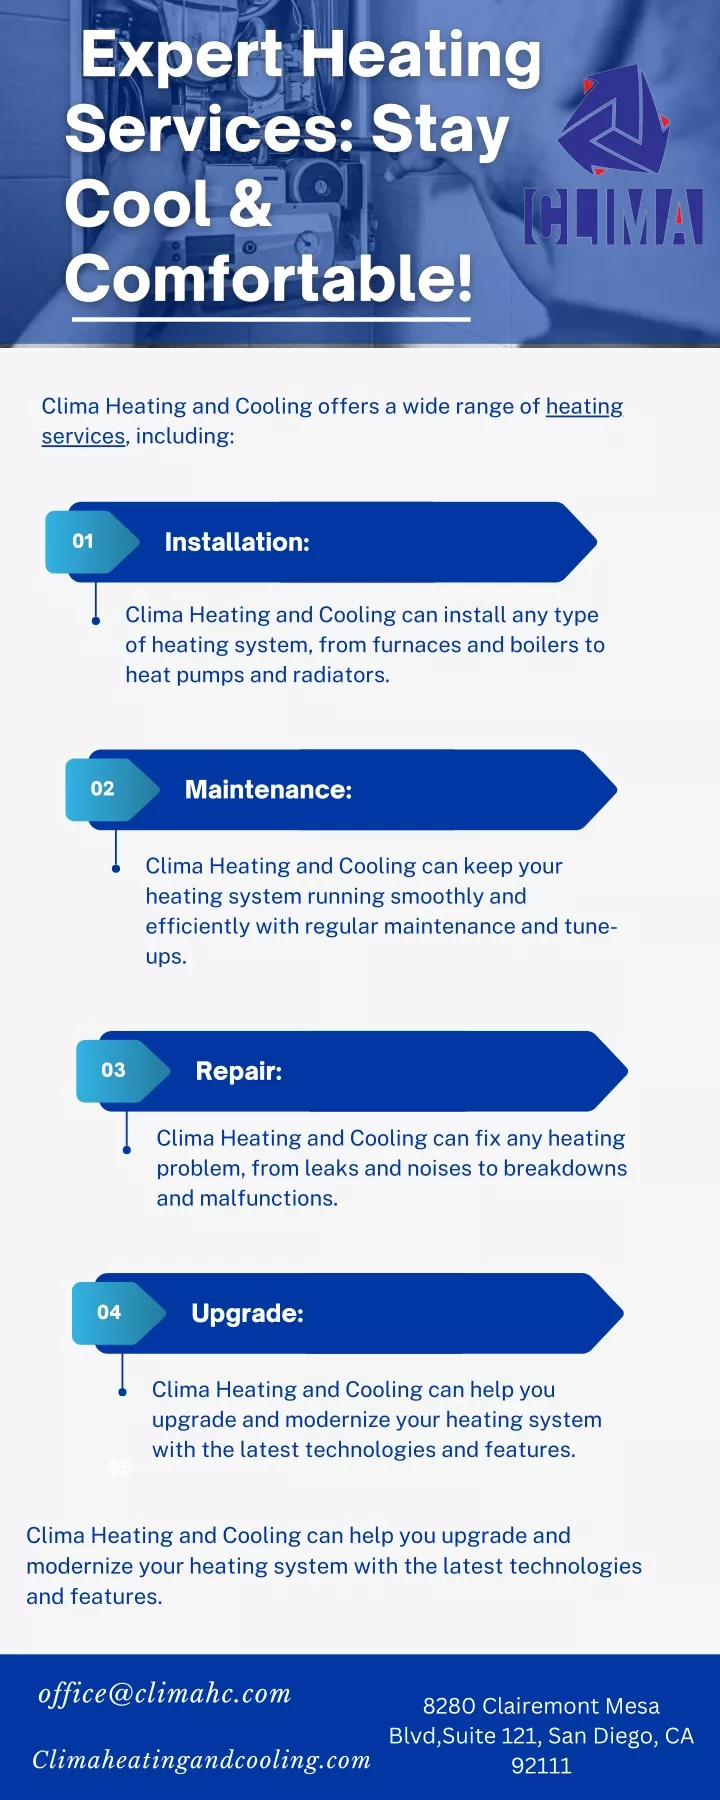 clima heating and cooling offers a wide range